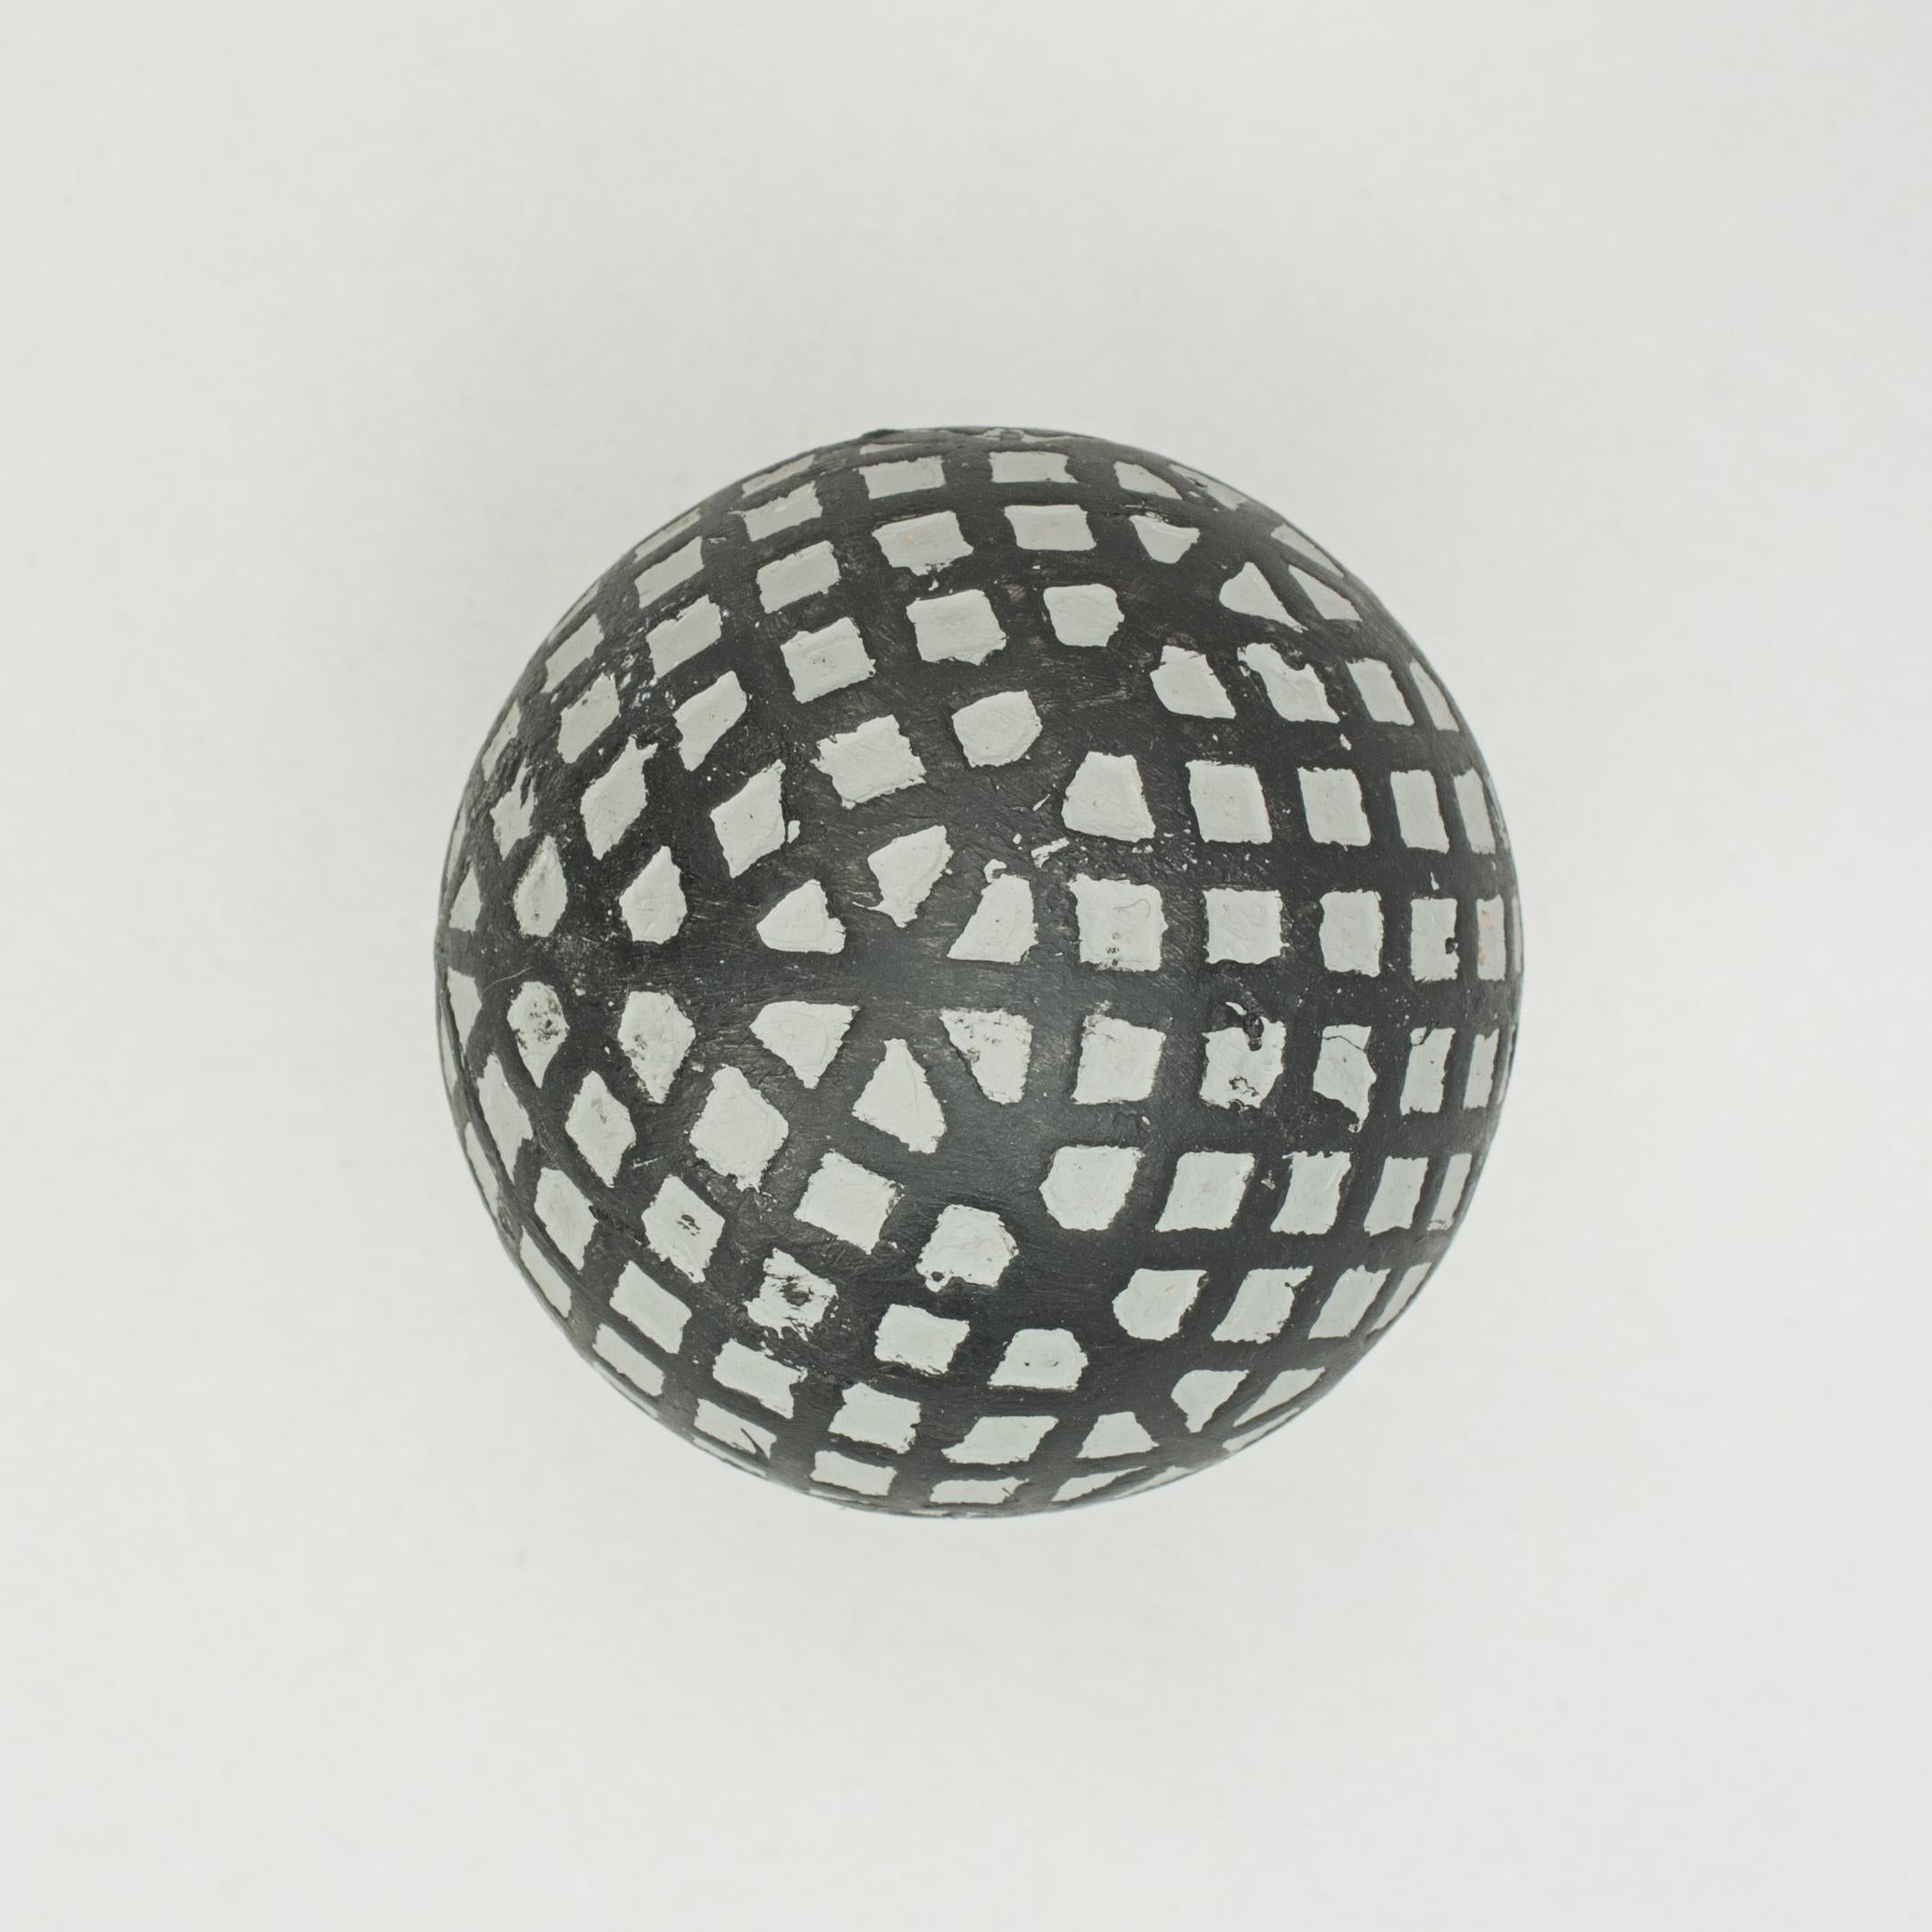 Mesh Pattern Maltese Cross Golf Ball.
A rubber core mesh golf ball in a refurbished condition. The ball has an unusual diamond mesh pattern with a 'Maltese Cross' on both poles of the ball, manufactured by Leyland and Birmingham Rubber Co.

The